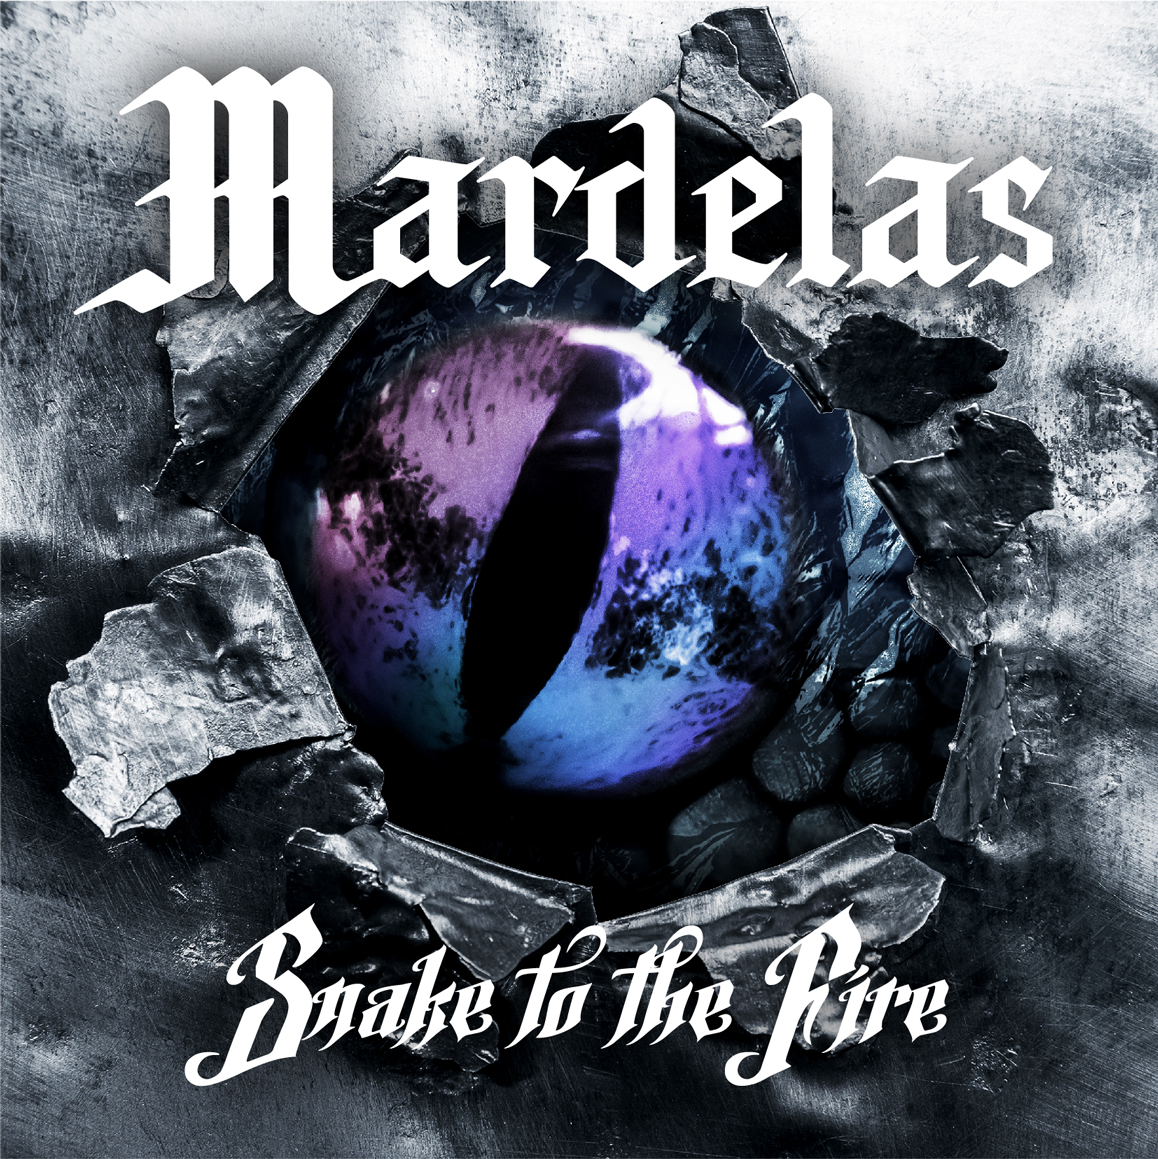 mardelas snake to the fire マーデラスポップス/ロック(邦楽)